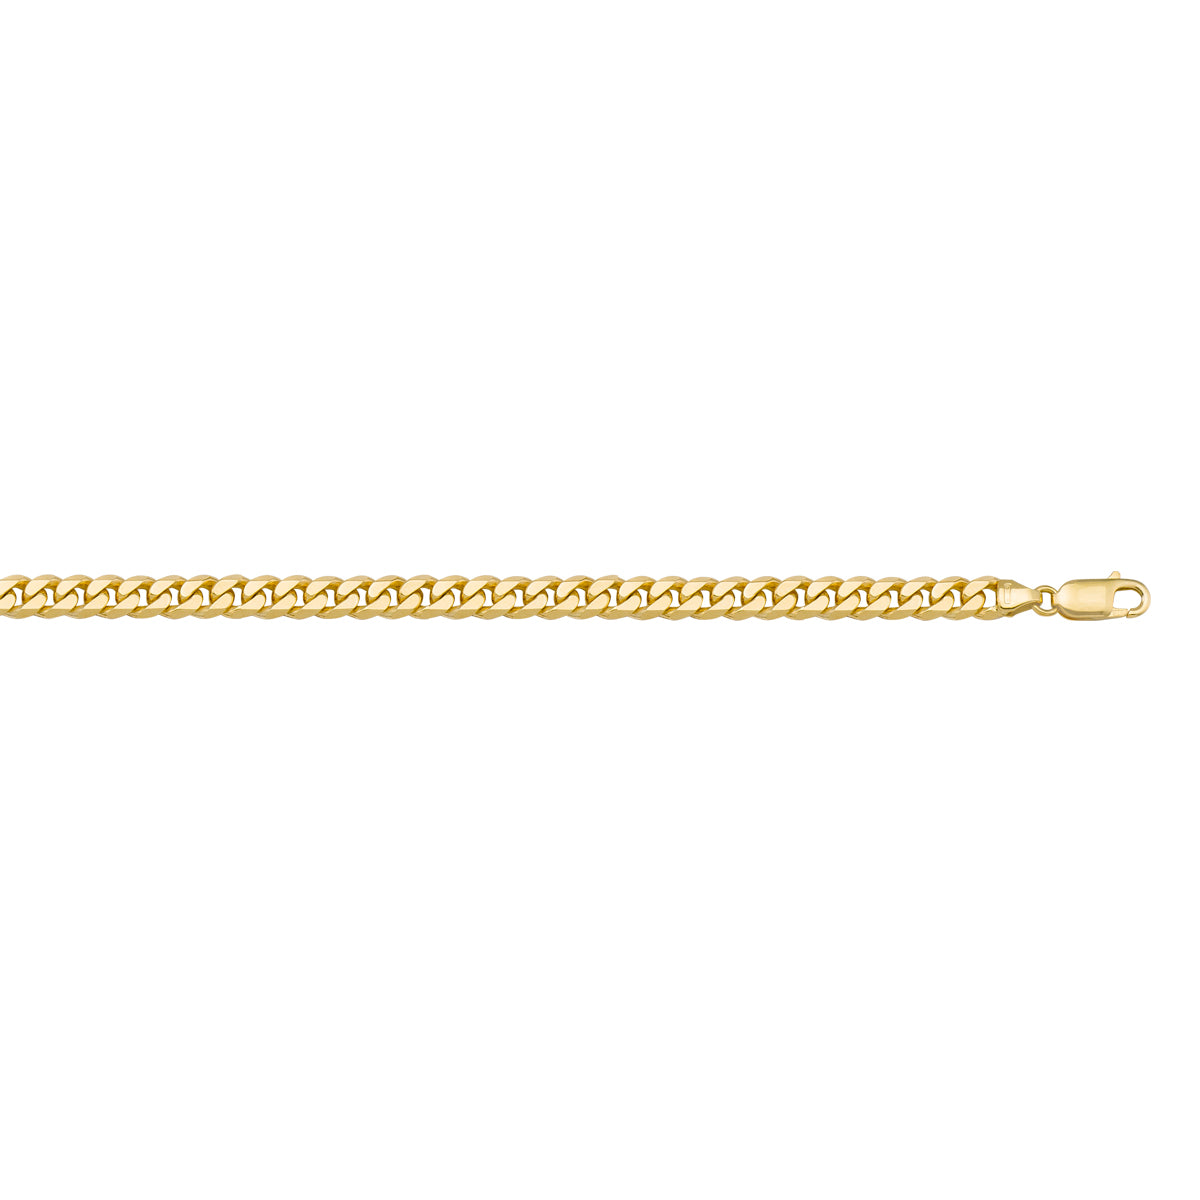 BRACELETS YELLOW GOLD SOLID FLAT BEVELED LINK CHAIN